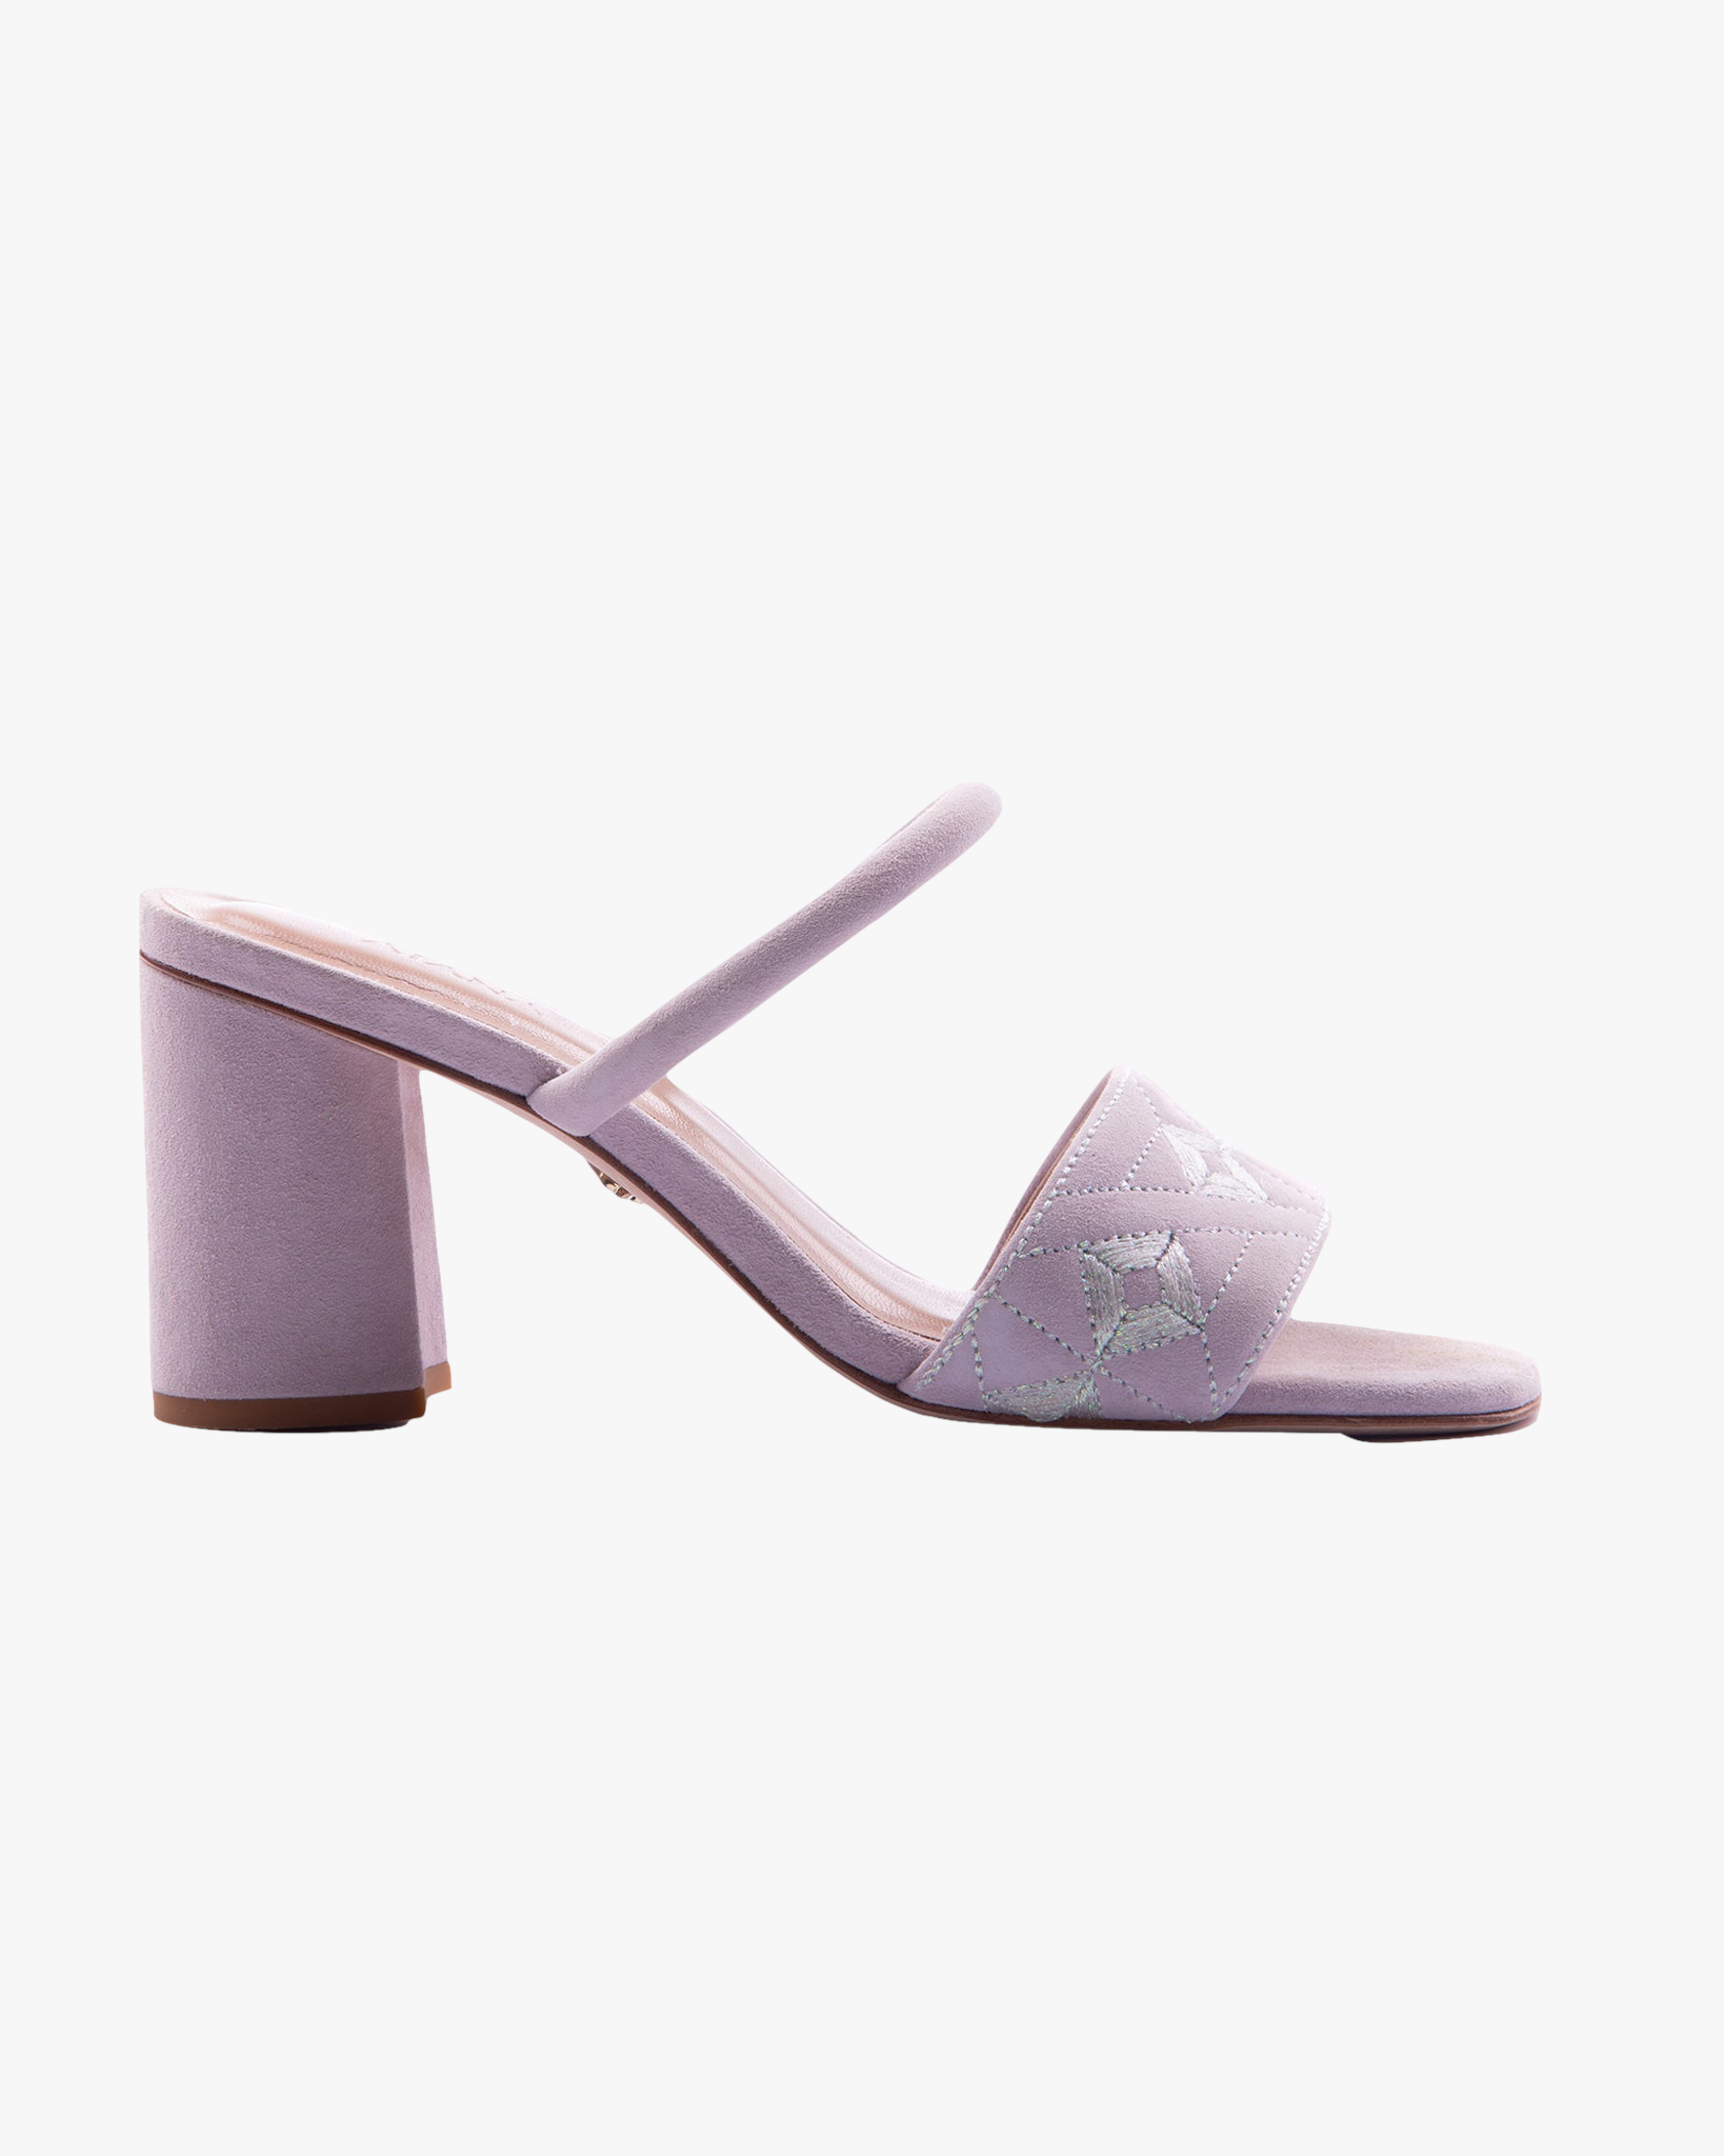 Shop Mules from emerging designers